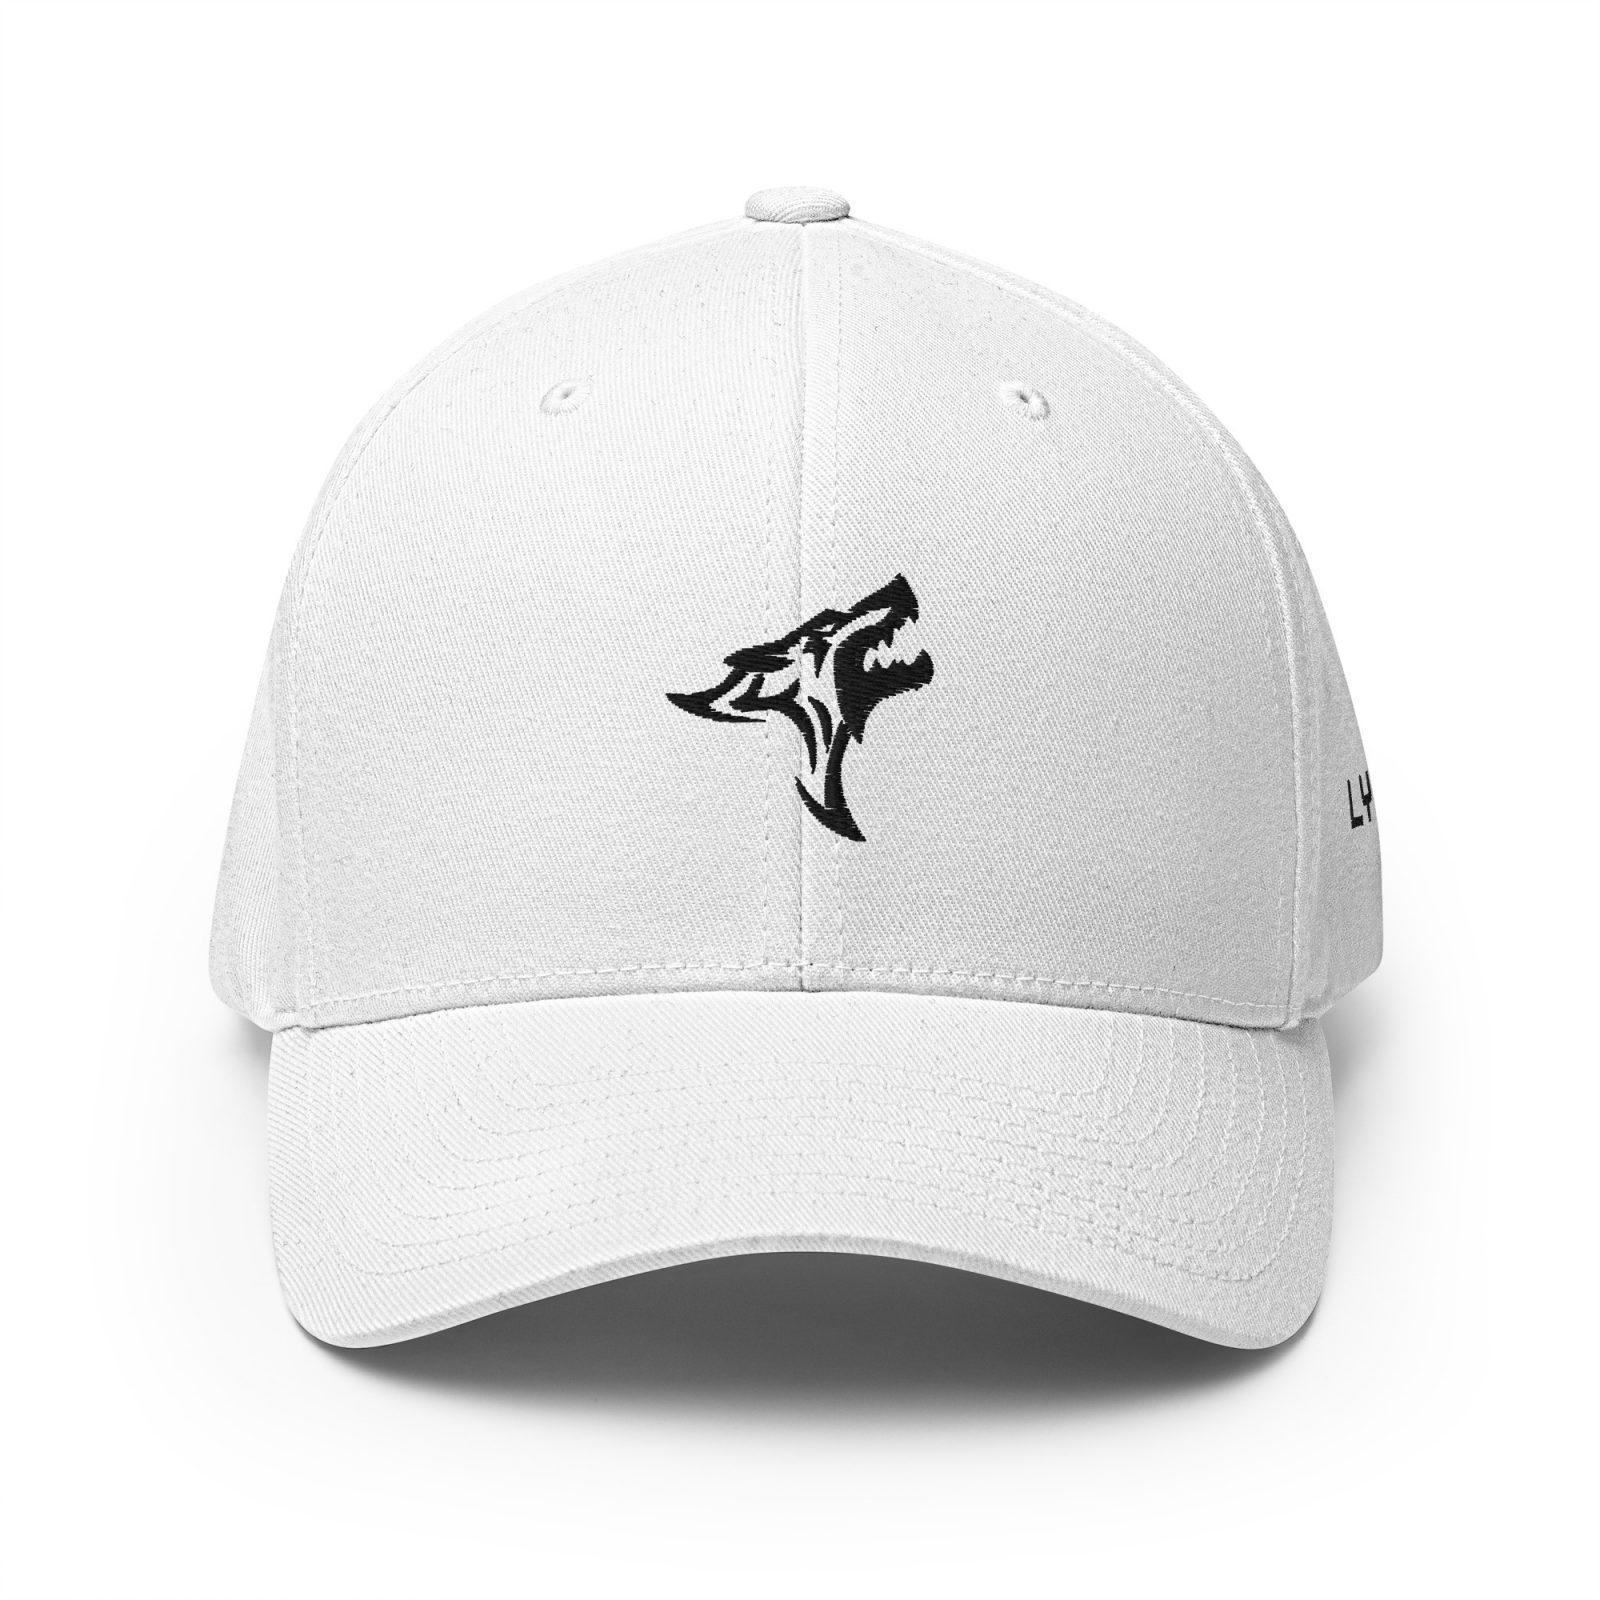 closed-back-structured-cap-white-front-62b8fb481cd18-1.jpeg